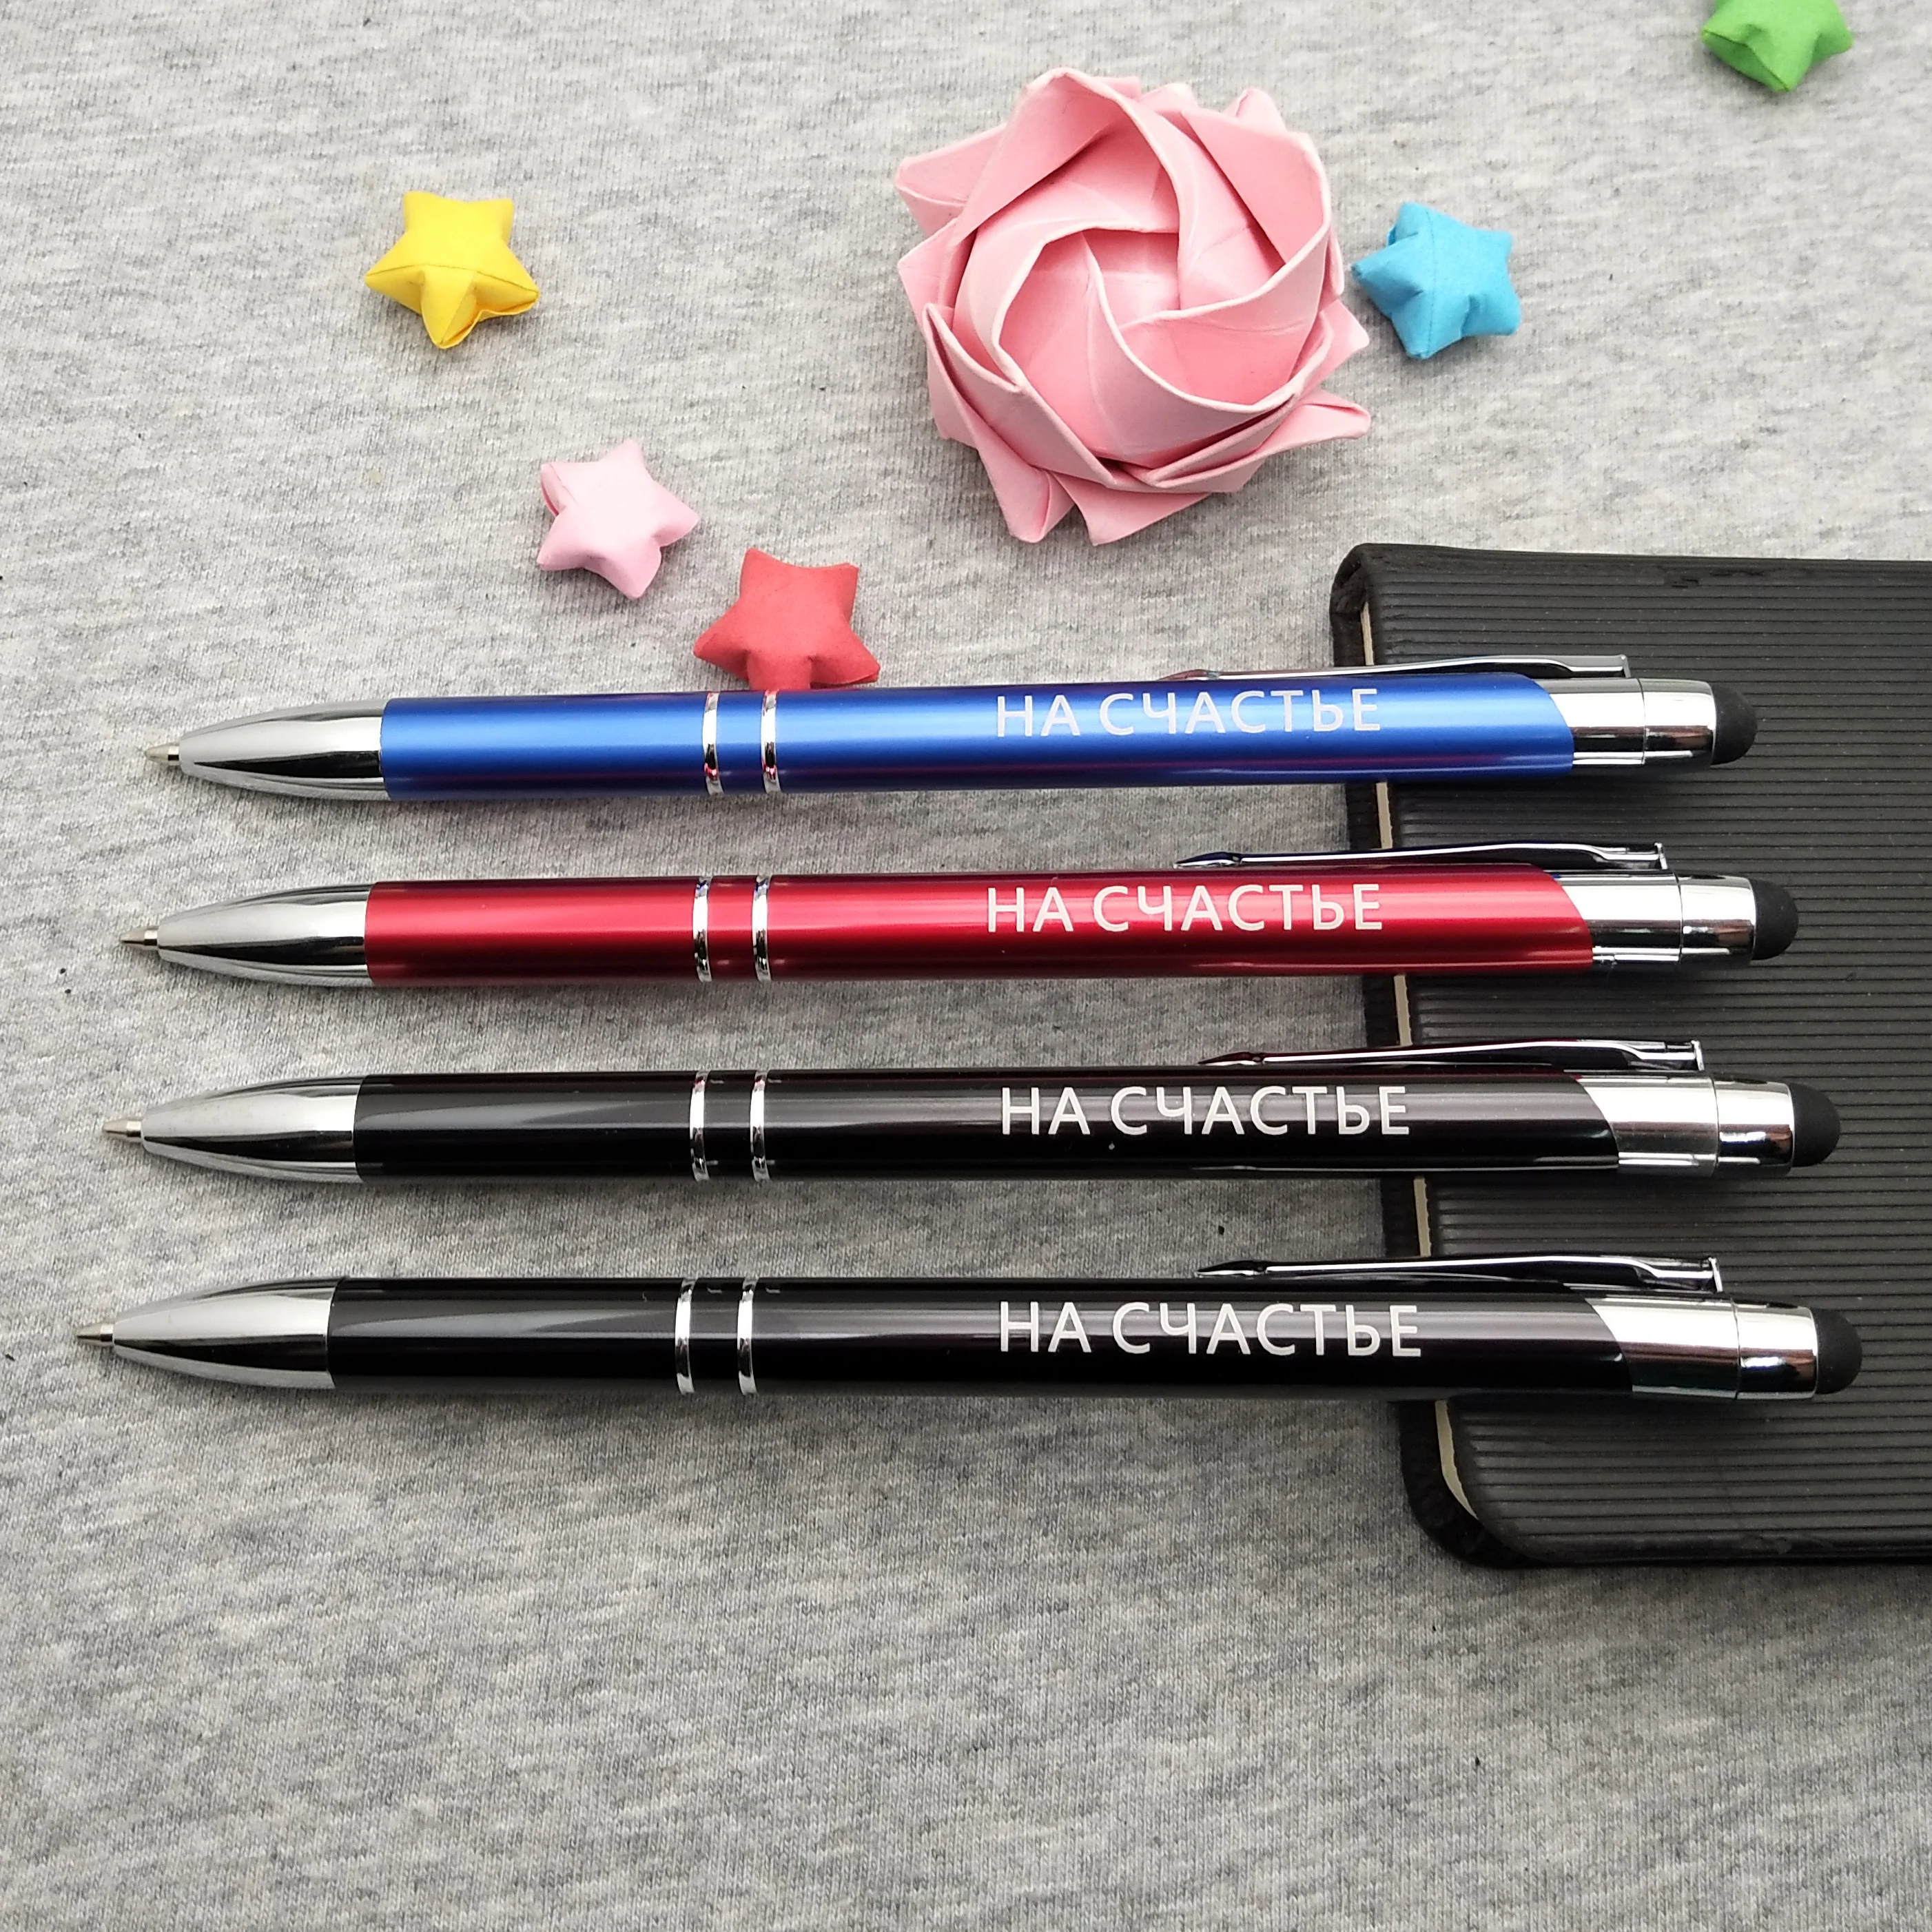 New design metal Capacitive Touch Stylus Pen for screen touch tablets metal pen can laser engraving company logo 90pcs